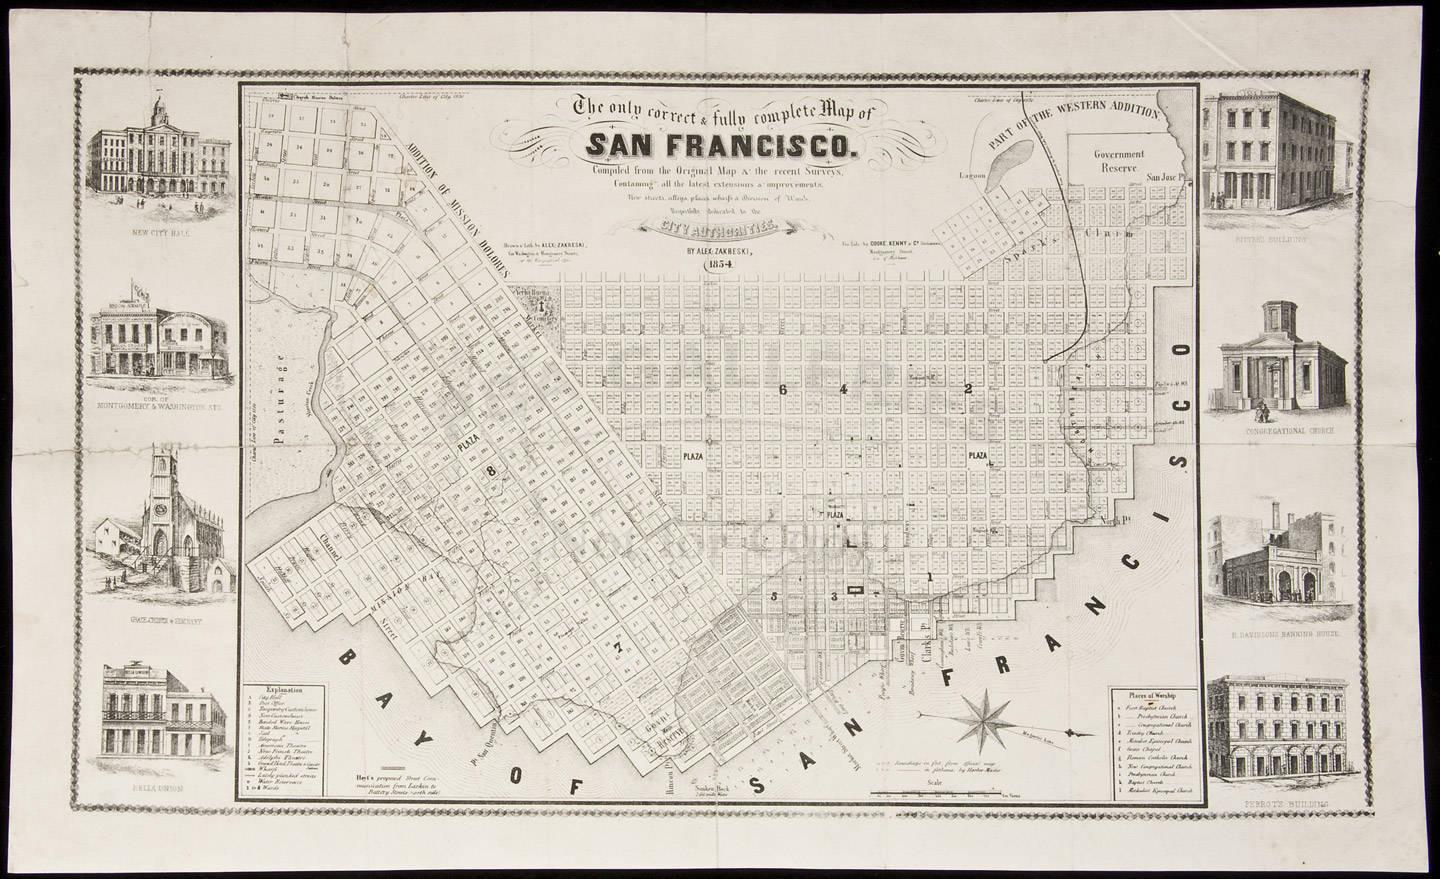 The Only Correct & Fully Complete Map of San Francisco by Alexander Zakreski. PBA gAlleries image